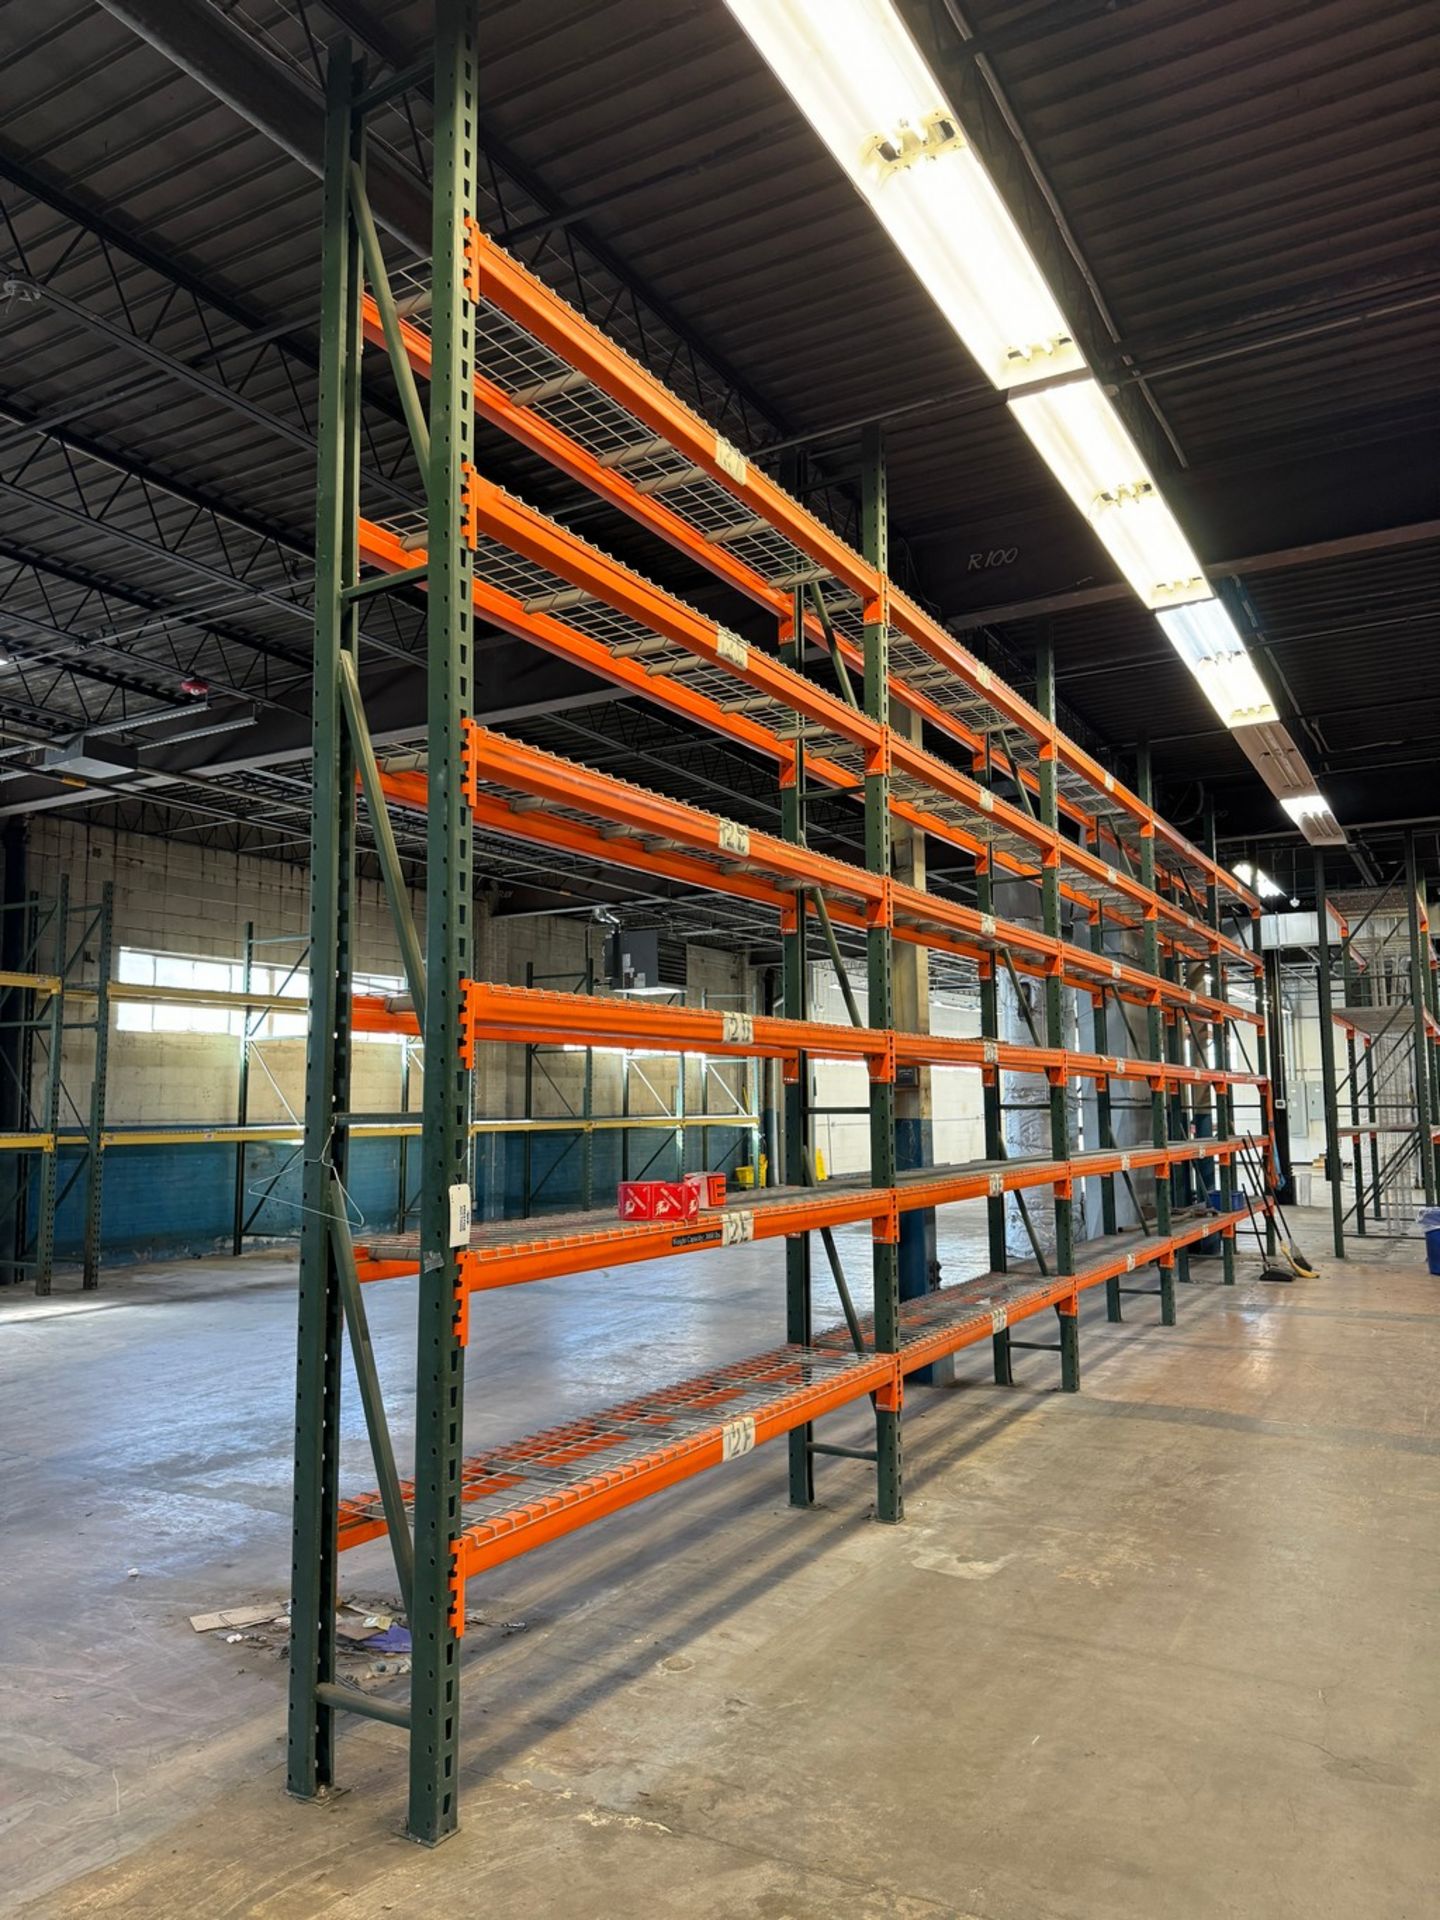 5-Sections Heavy Duty Pallet Racking, 96"W x 18"D x 168"H, 3000 LB Weight Capacity